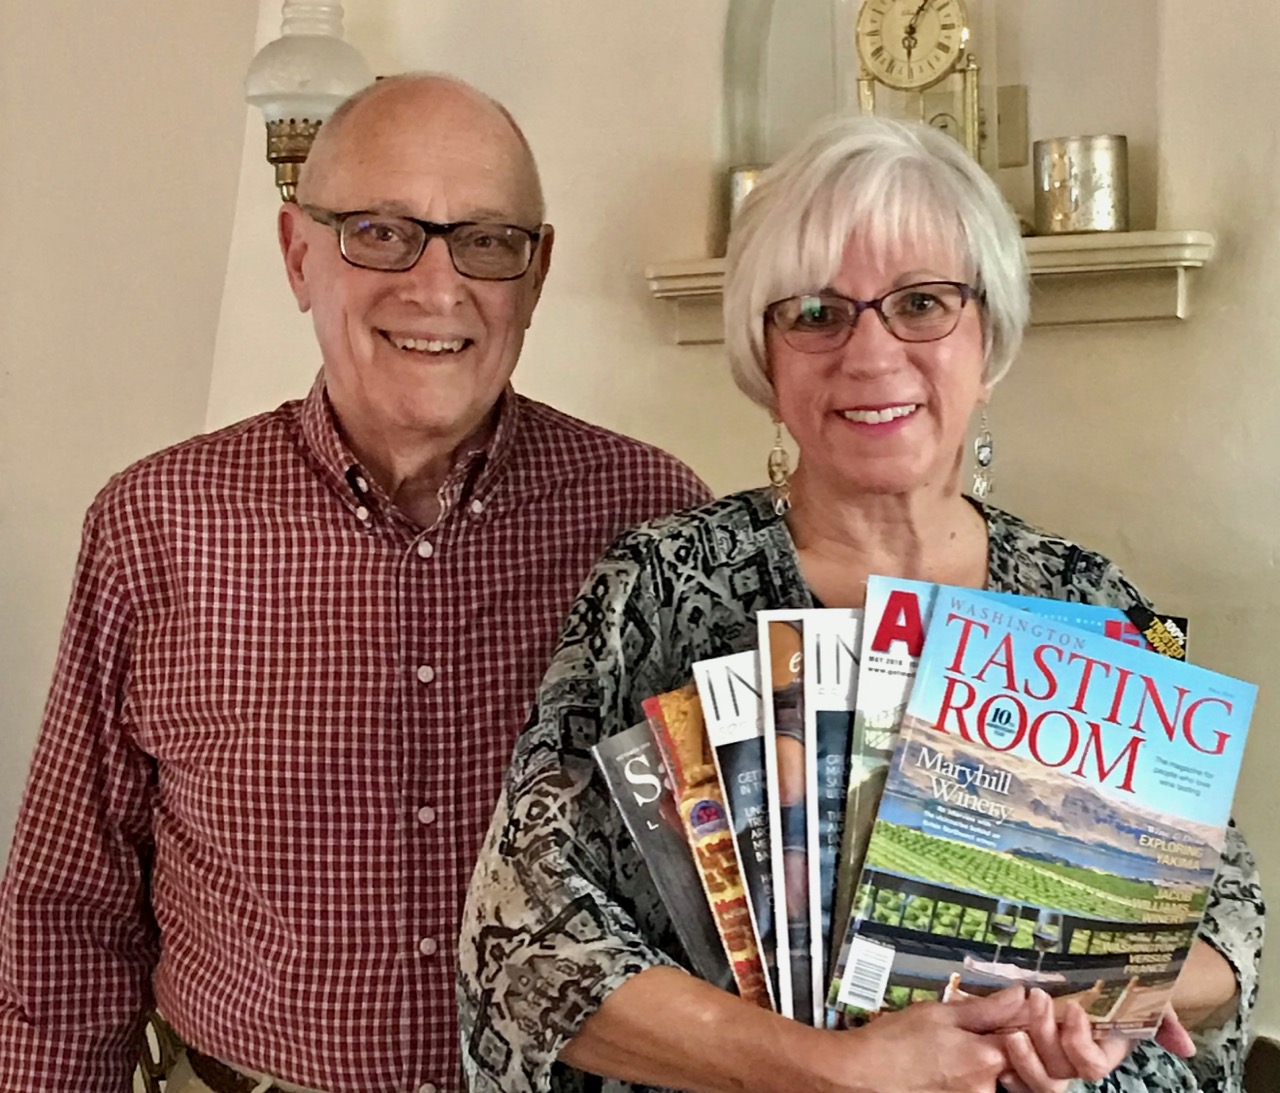 The success story of Pam & Gary Baker continues with this article of what they've been accomplishing the past year and the press trips they've scored . . .